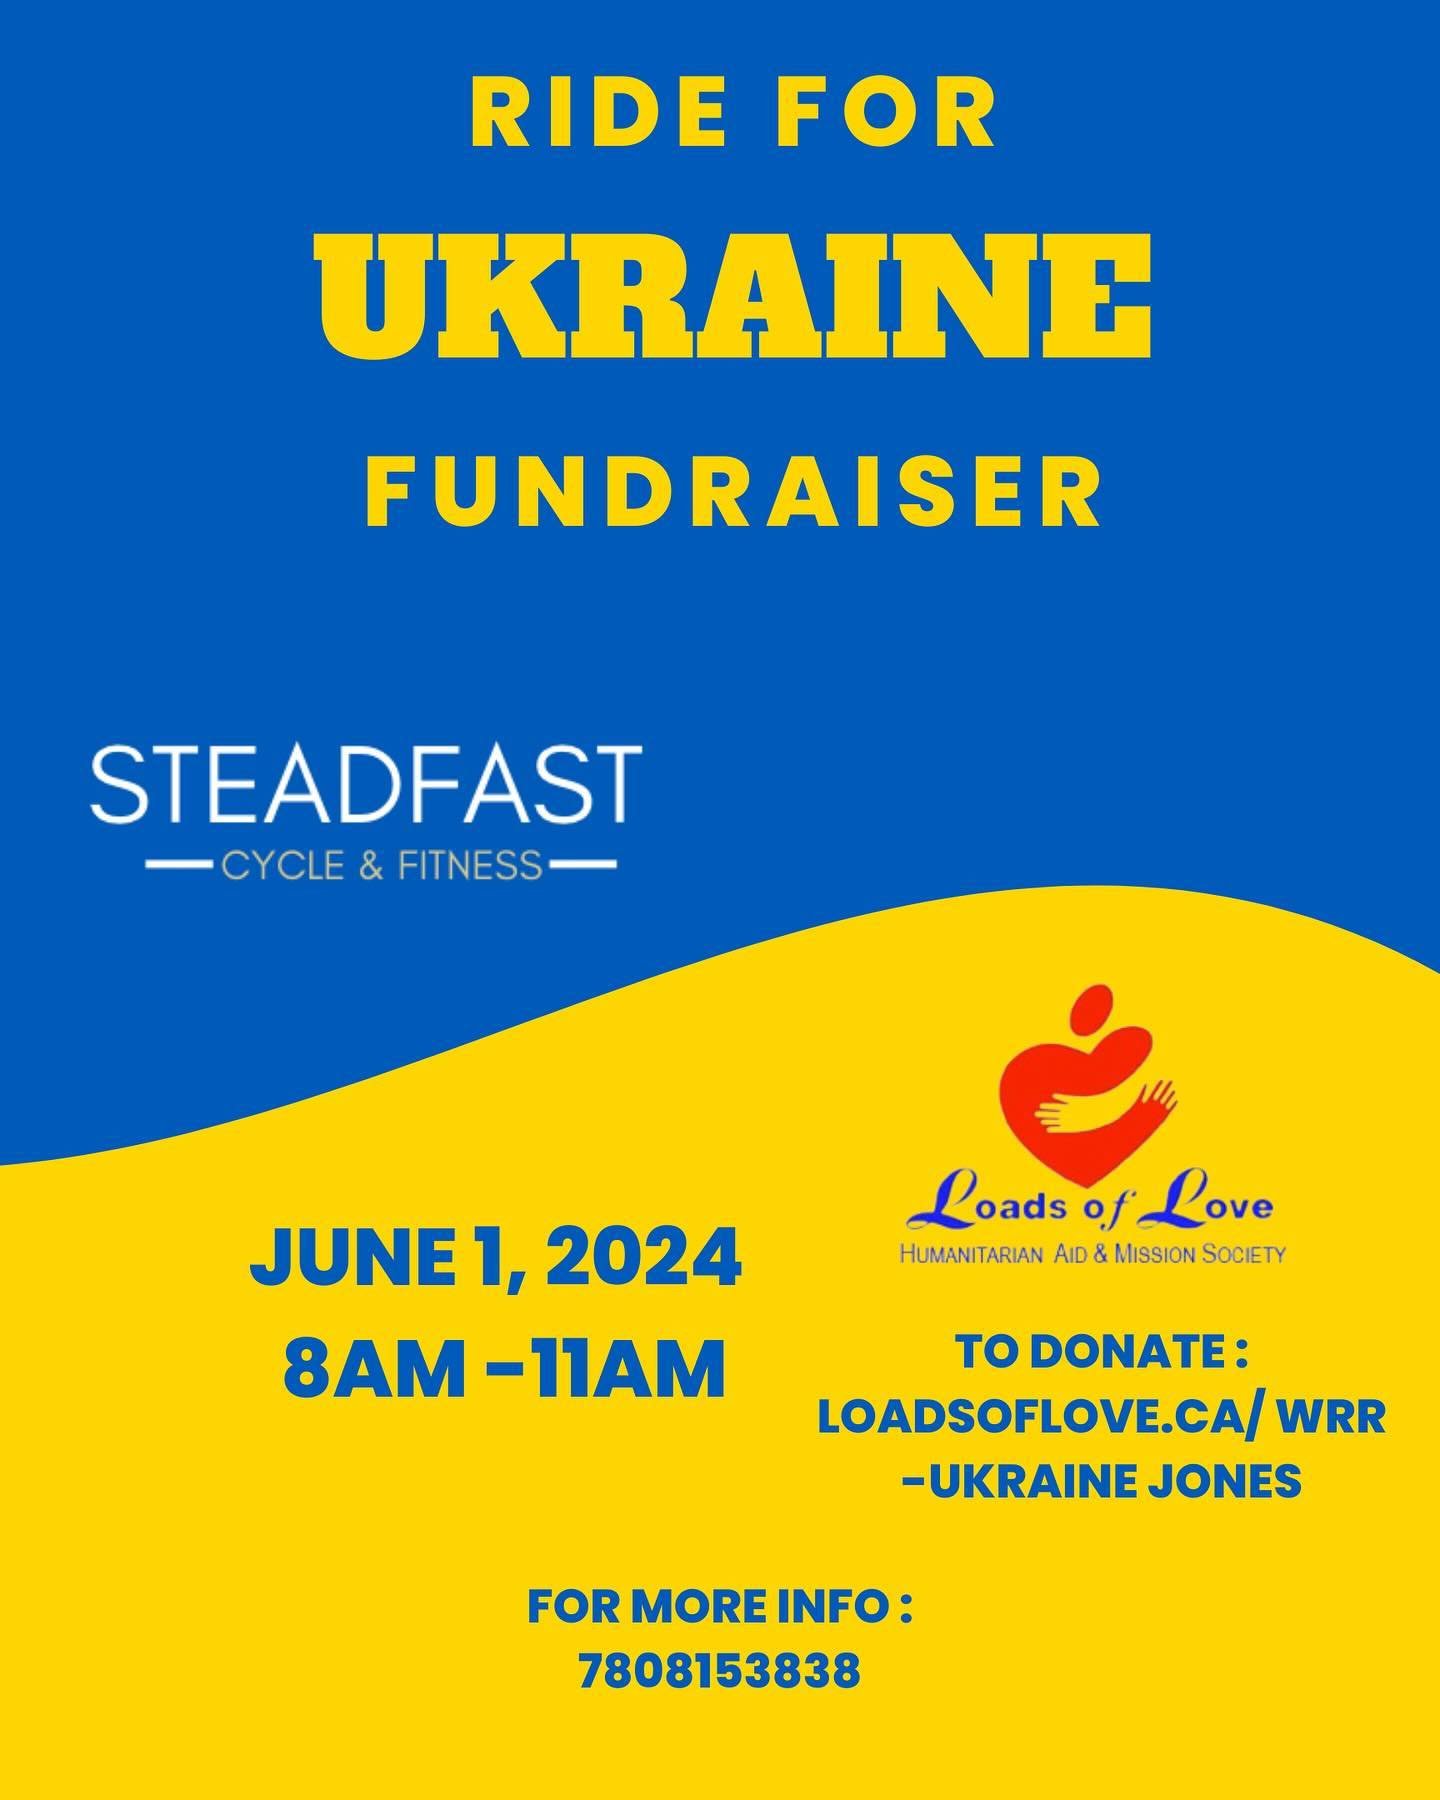 Our studio is so excited to host a fundraiser on June 1, 2024 in partnership with our good friend @bobrevwords and the Loads of Love Humanitarian organization.  All funds will be going to support the humanitarian efforts in the Ukraine. 

Join us on 